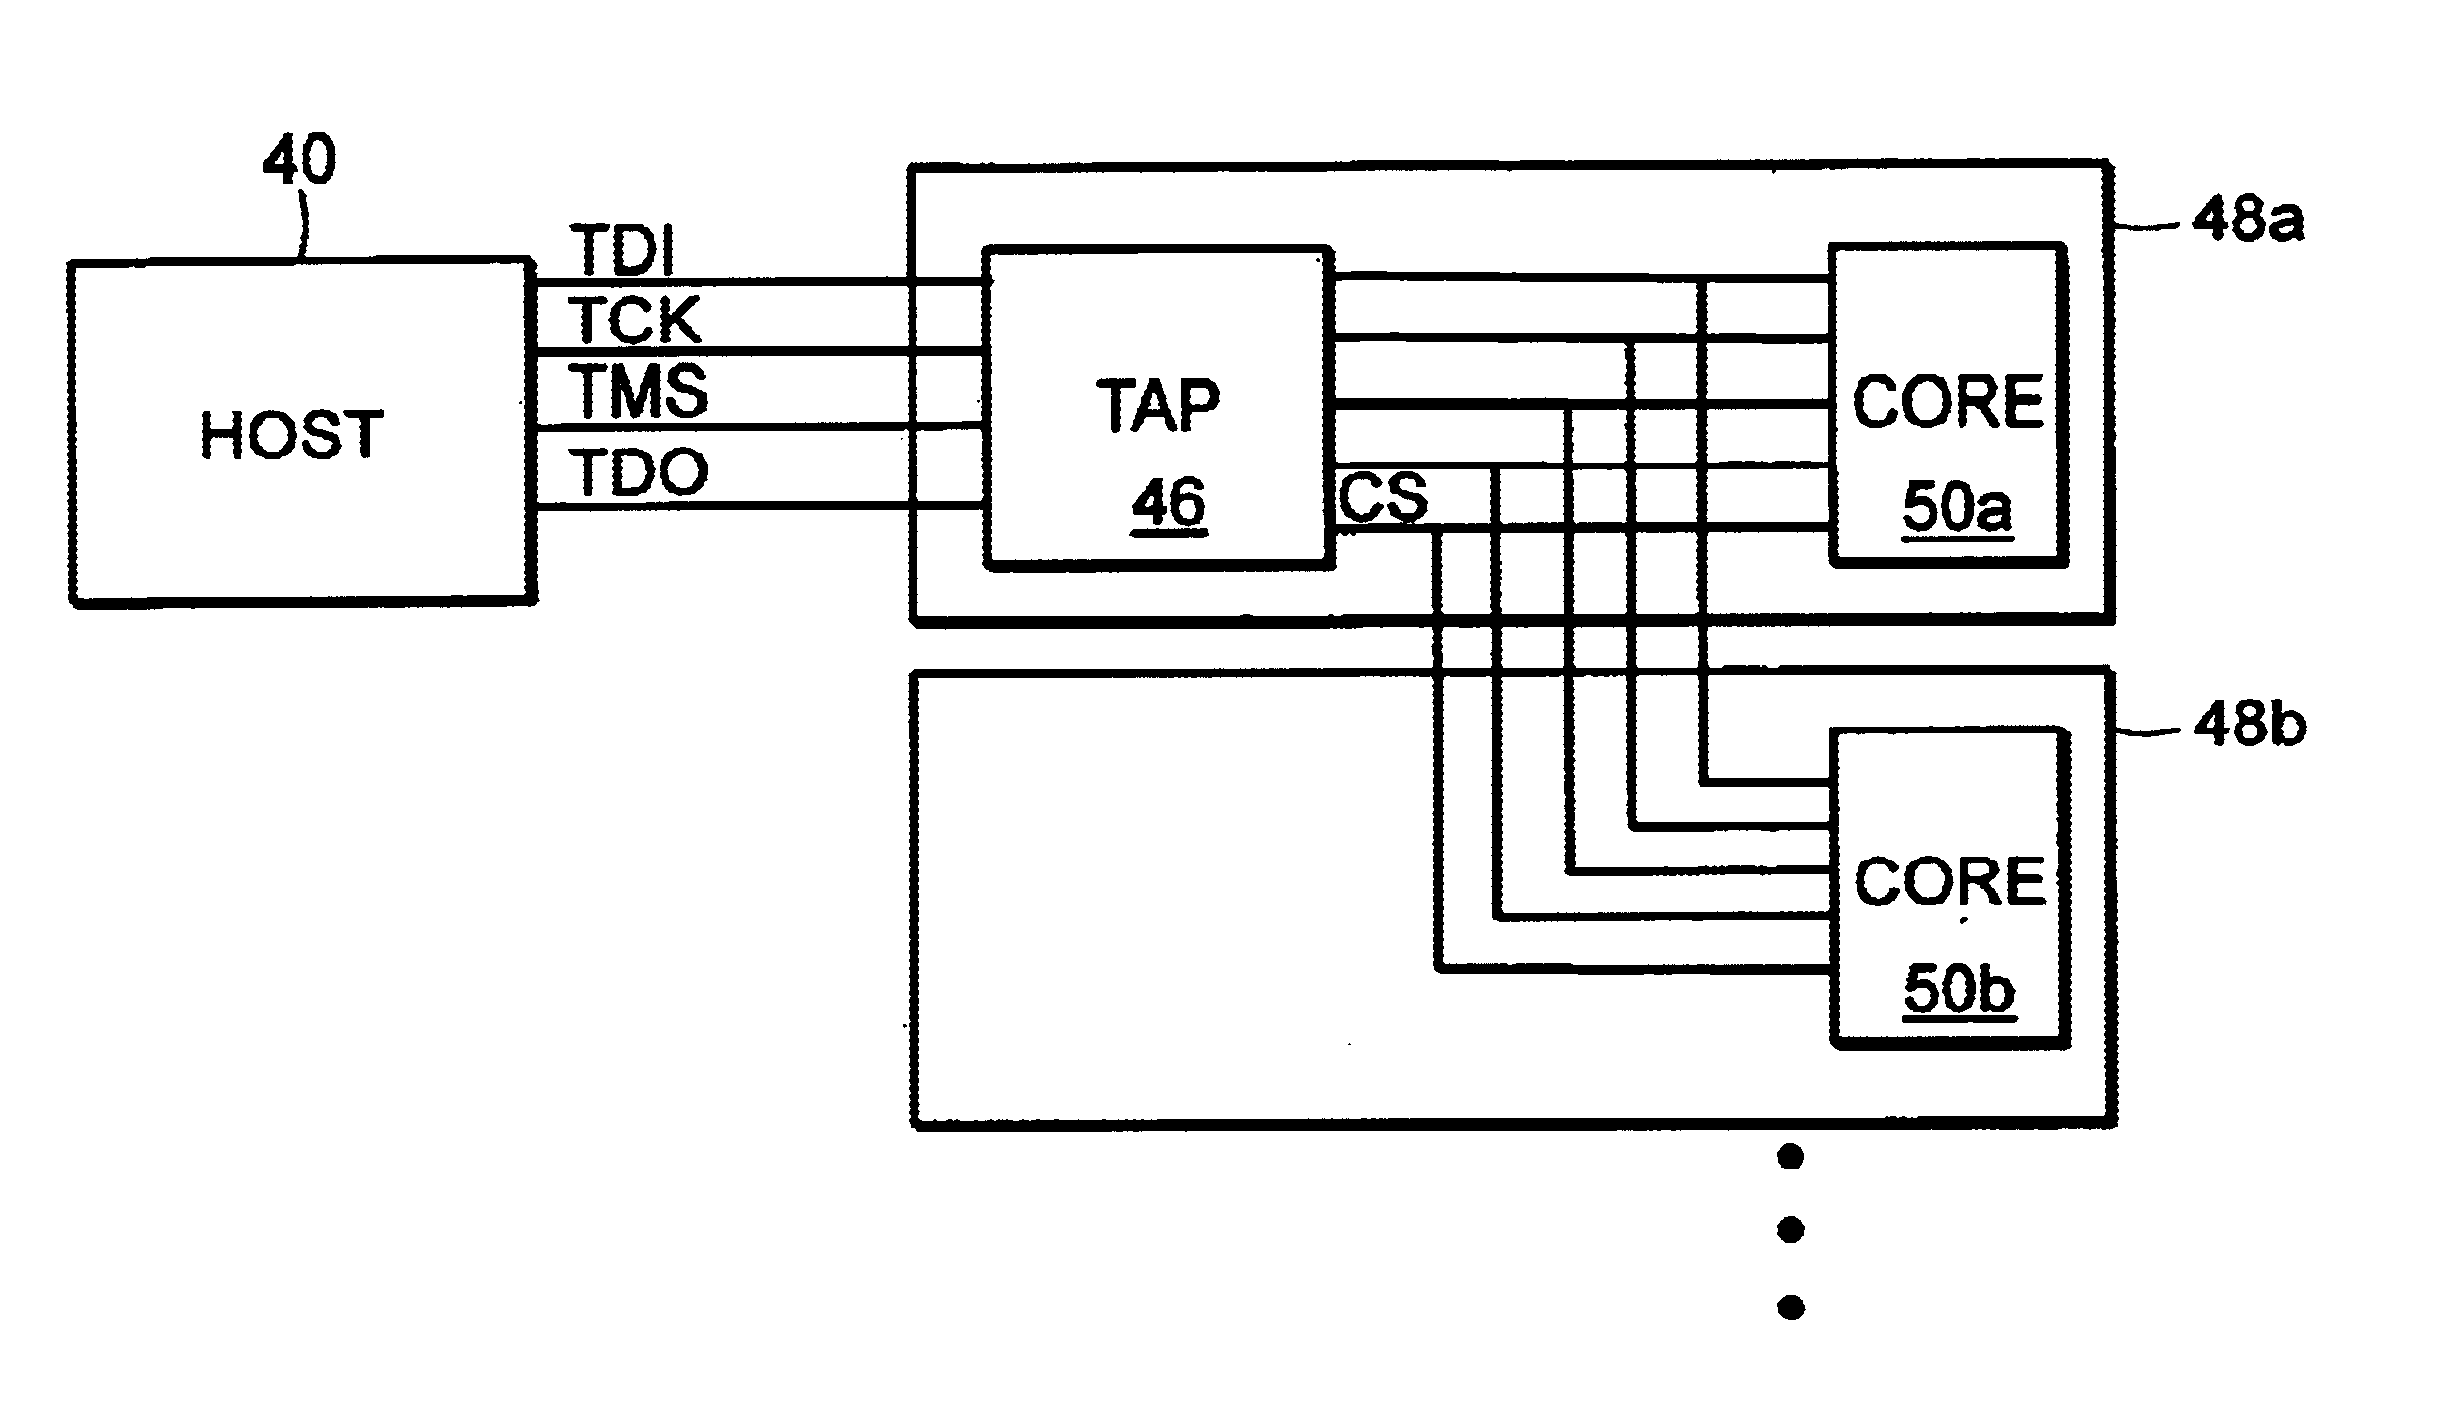 Architecture, circuitry and method for controlling a subsystem through a JTAG access port